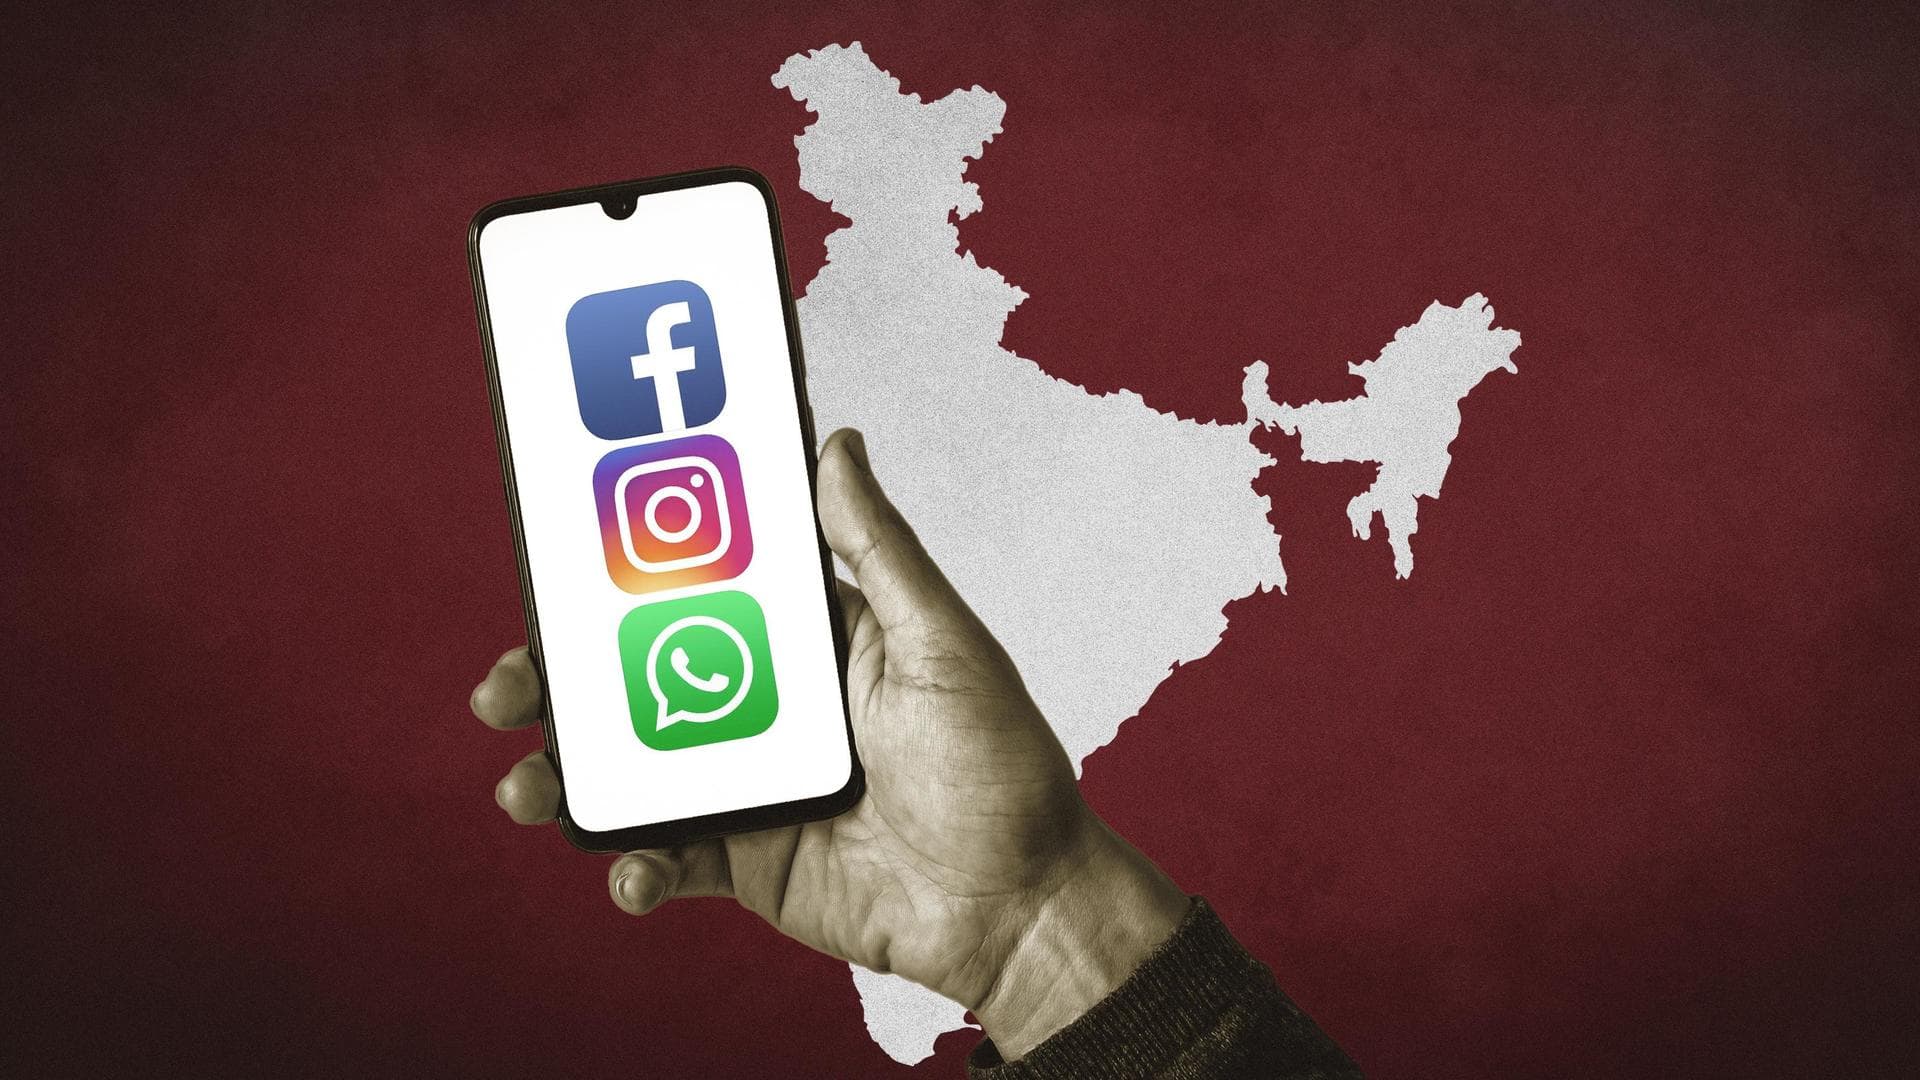 WhatsApp, Facebook, Instagram: How they dealt with Indian users' grievances